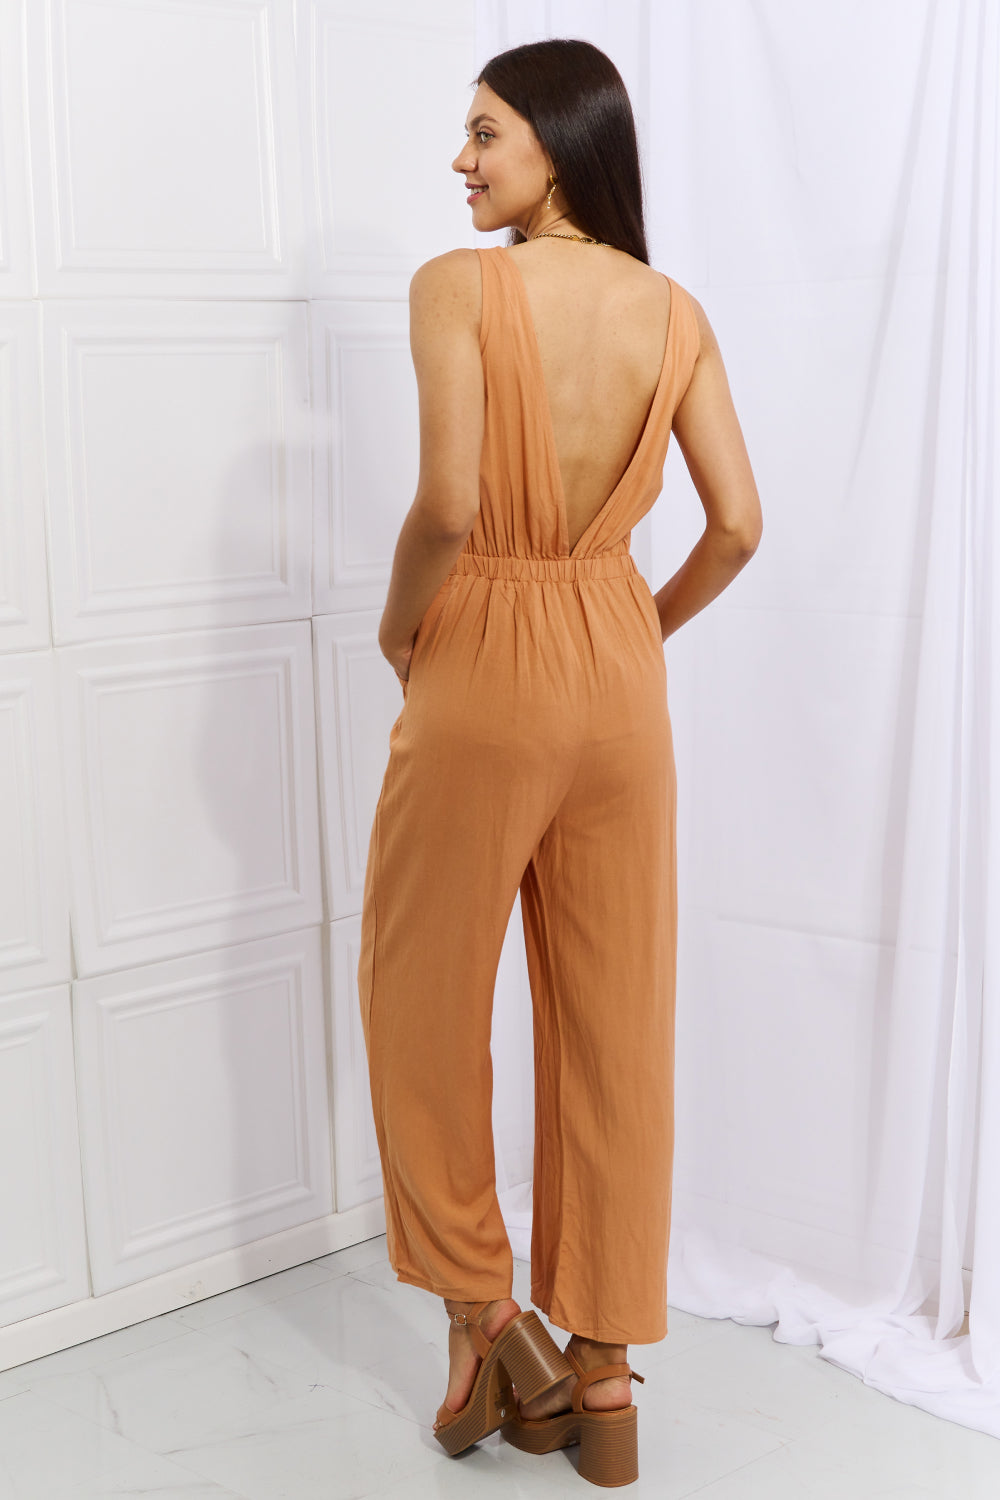 HEYSON Feels Right Cut Out Detail Wide Leg Jumpsuit in Sherbet  Sunset and Swim   